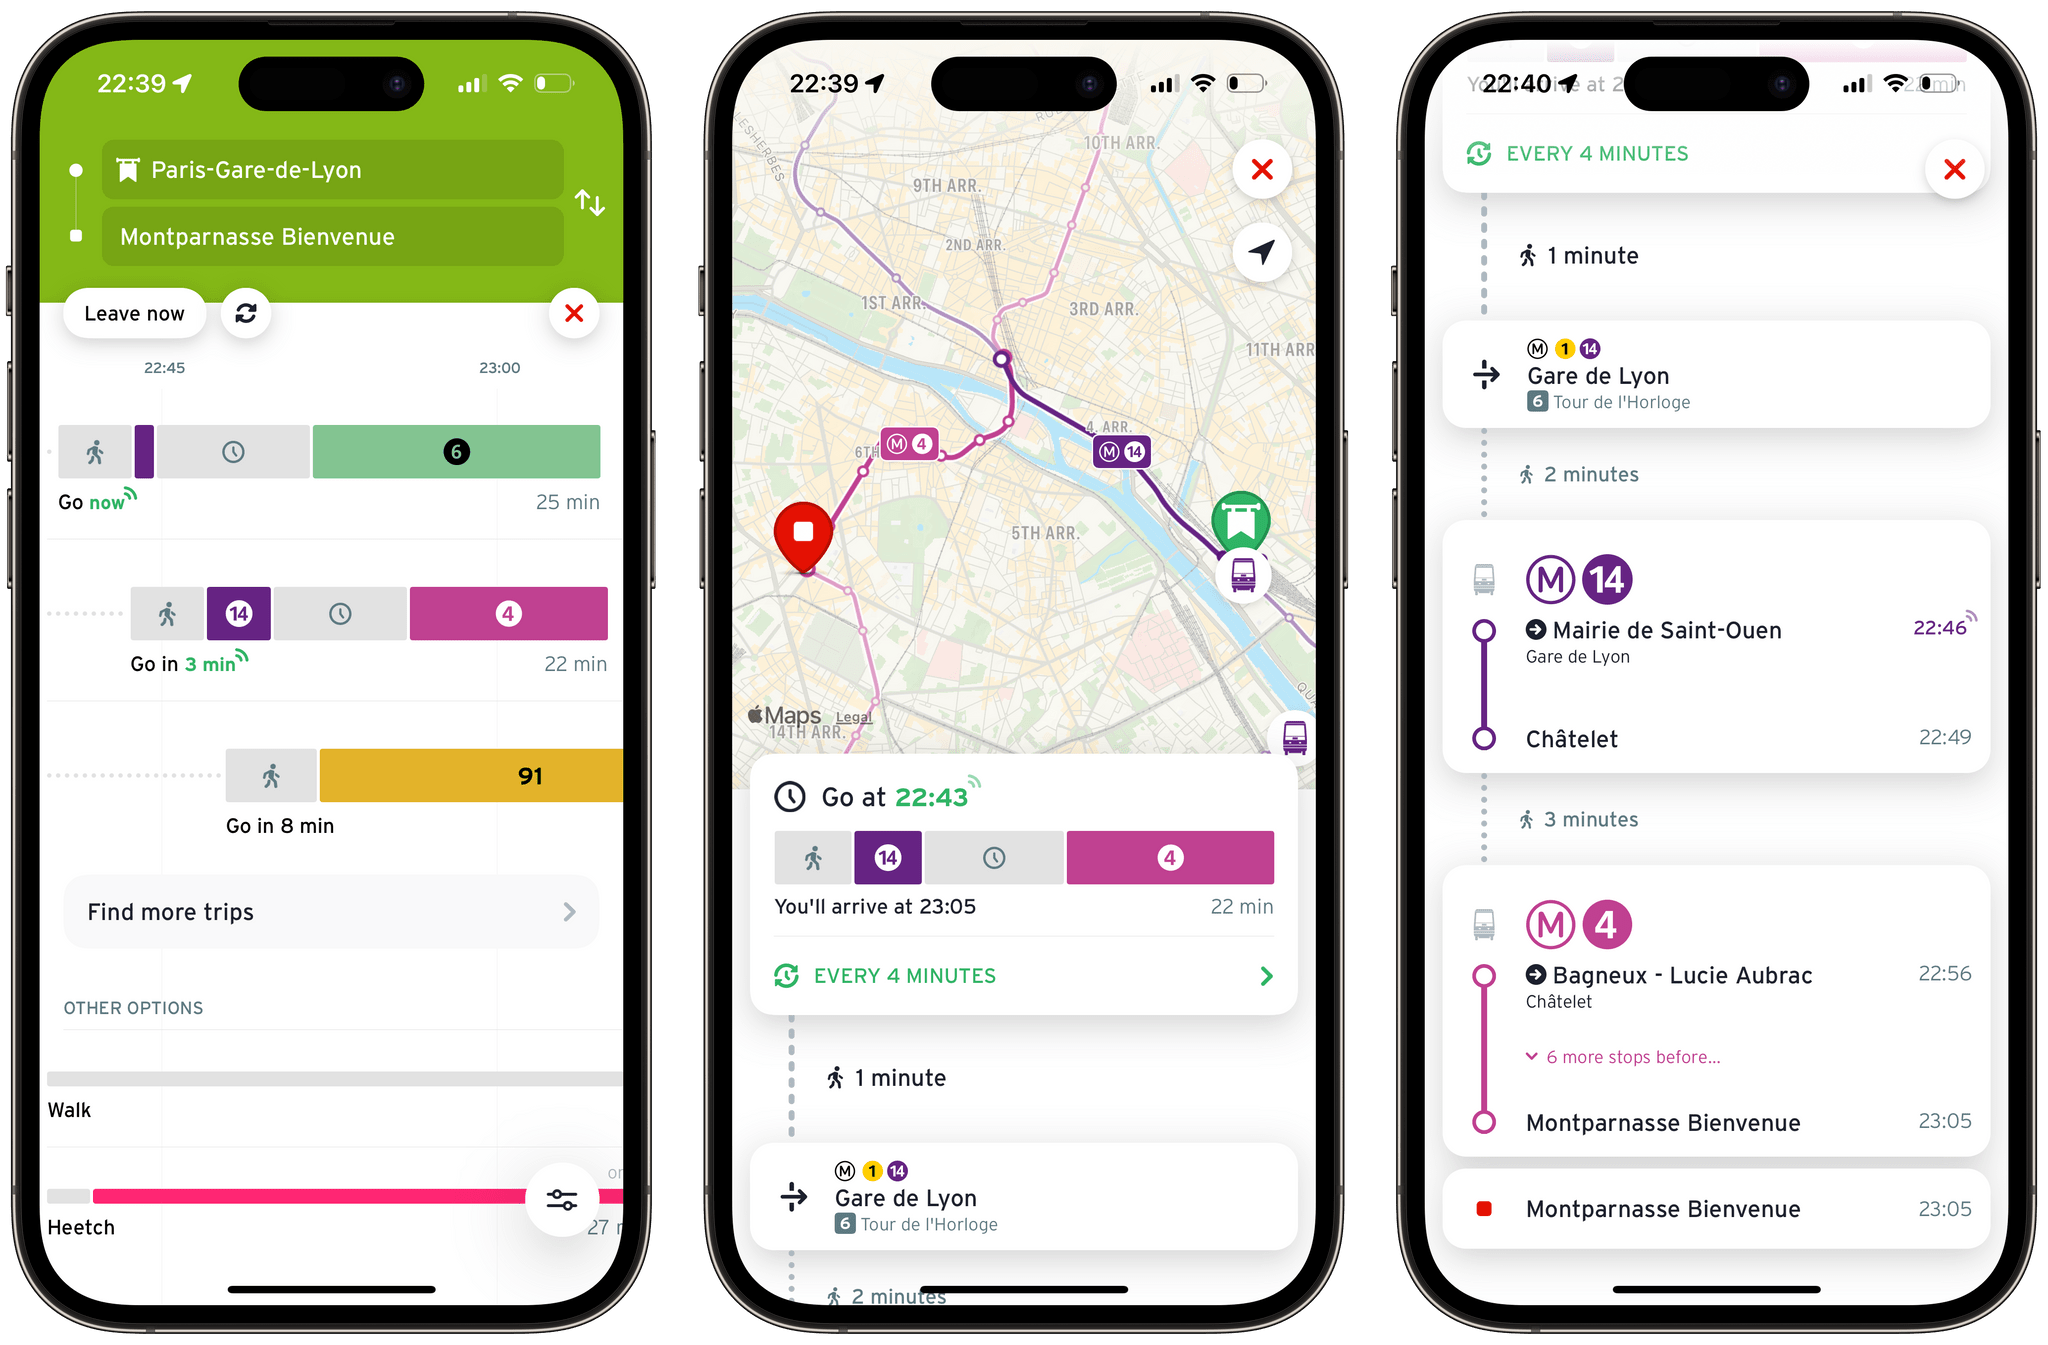 Searching for itineraries between Gare de Lyon and Montparnasse in Paris. Transit lets you compare its suggestions on a timeline (left). You can tap on any suggestions to preview it on the map (middle), and read a detailed breakdown of the itinerary (right). 